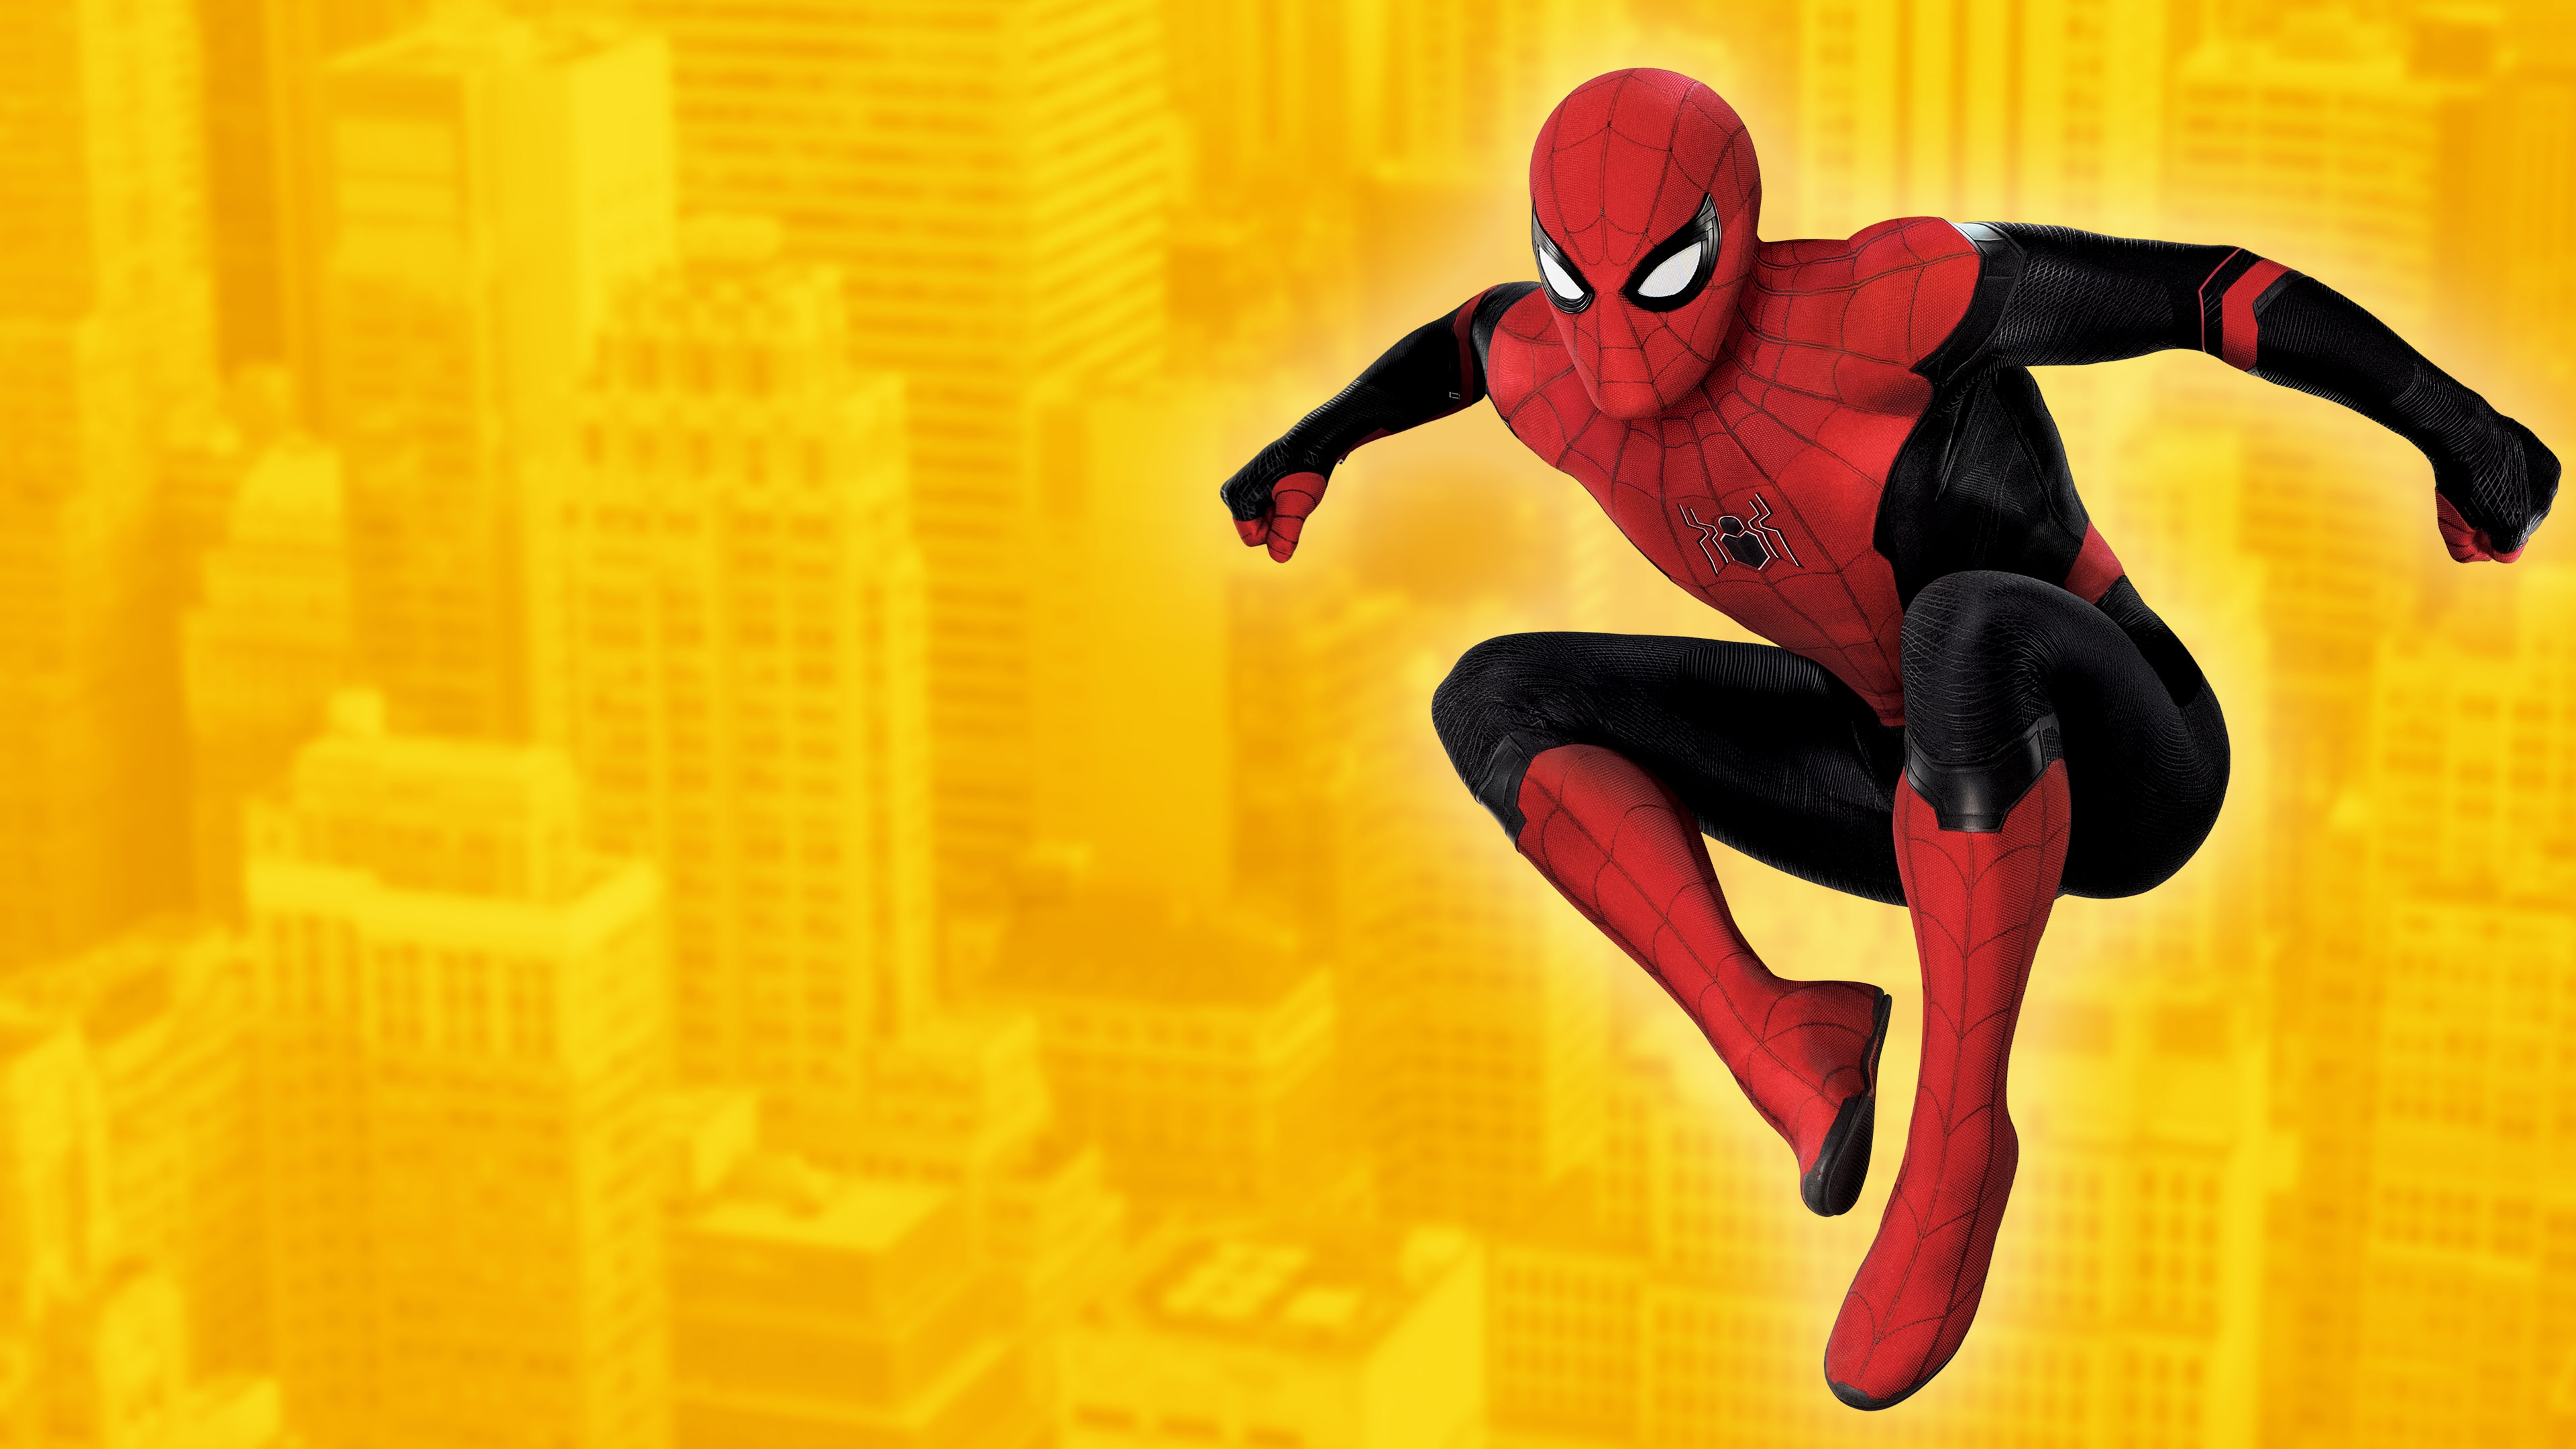 spider man far from home vr controls